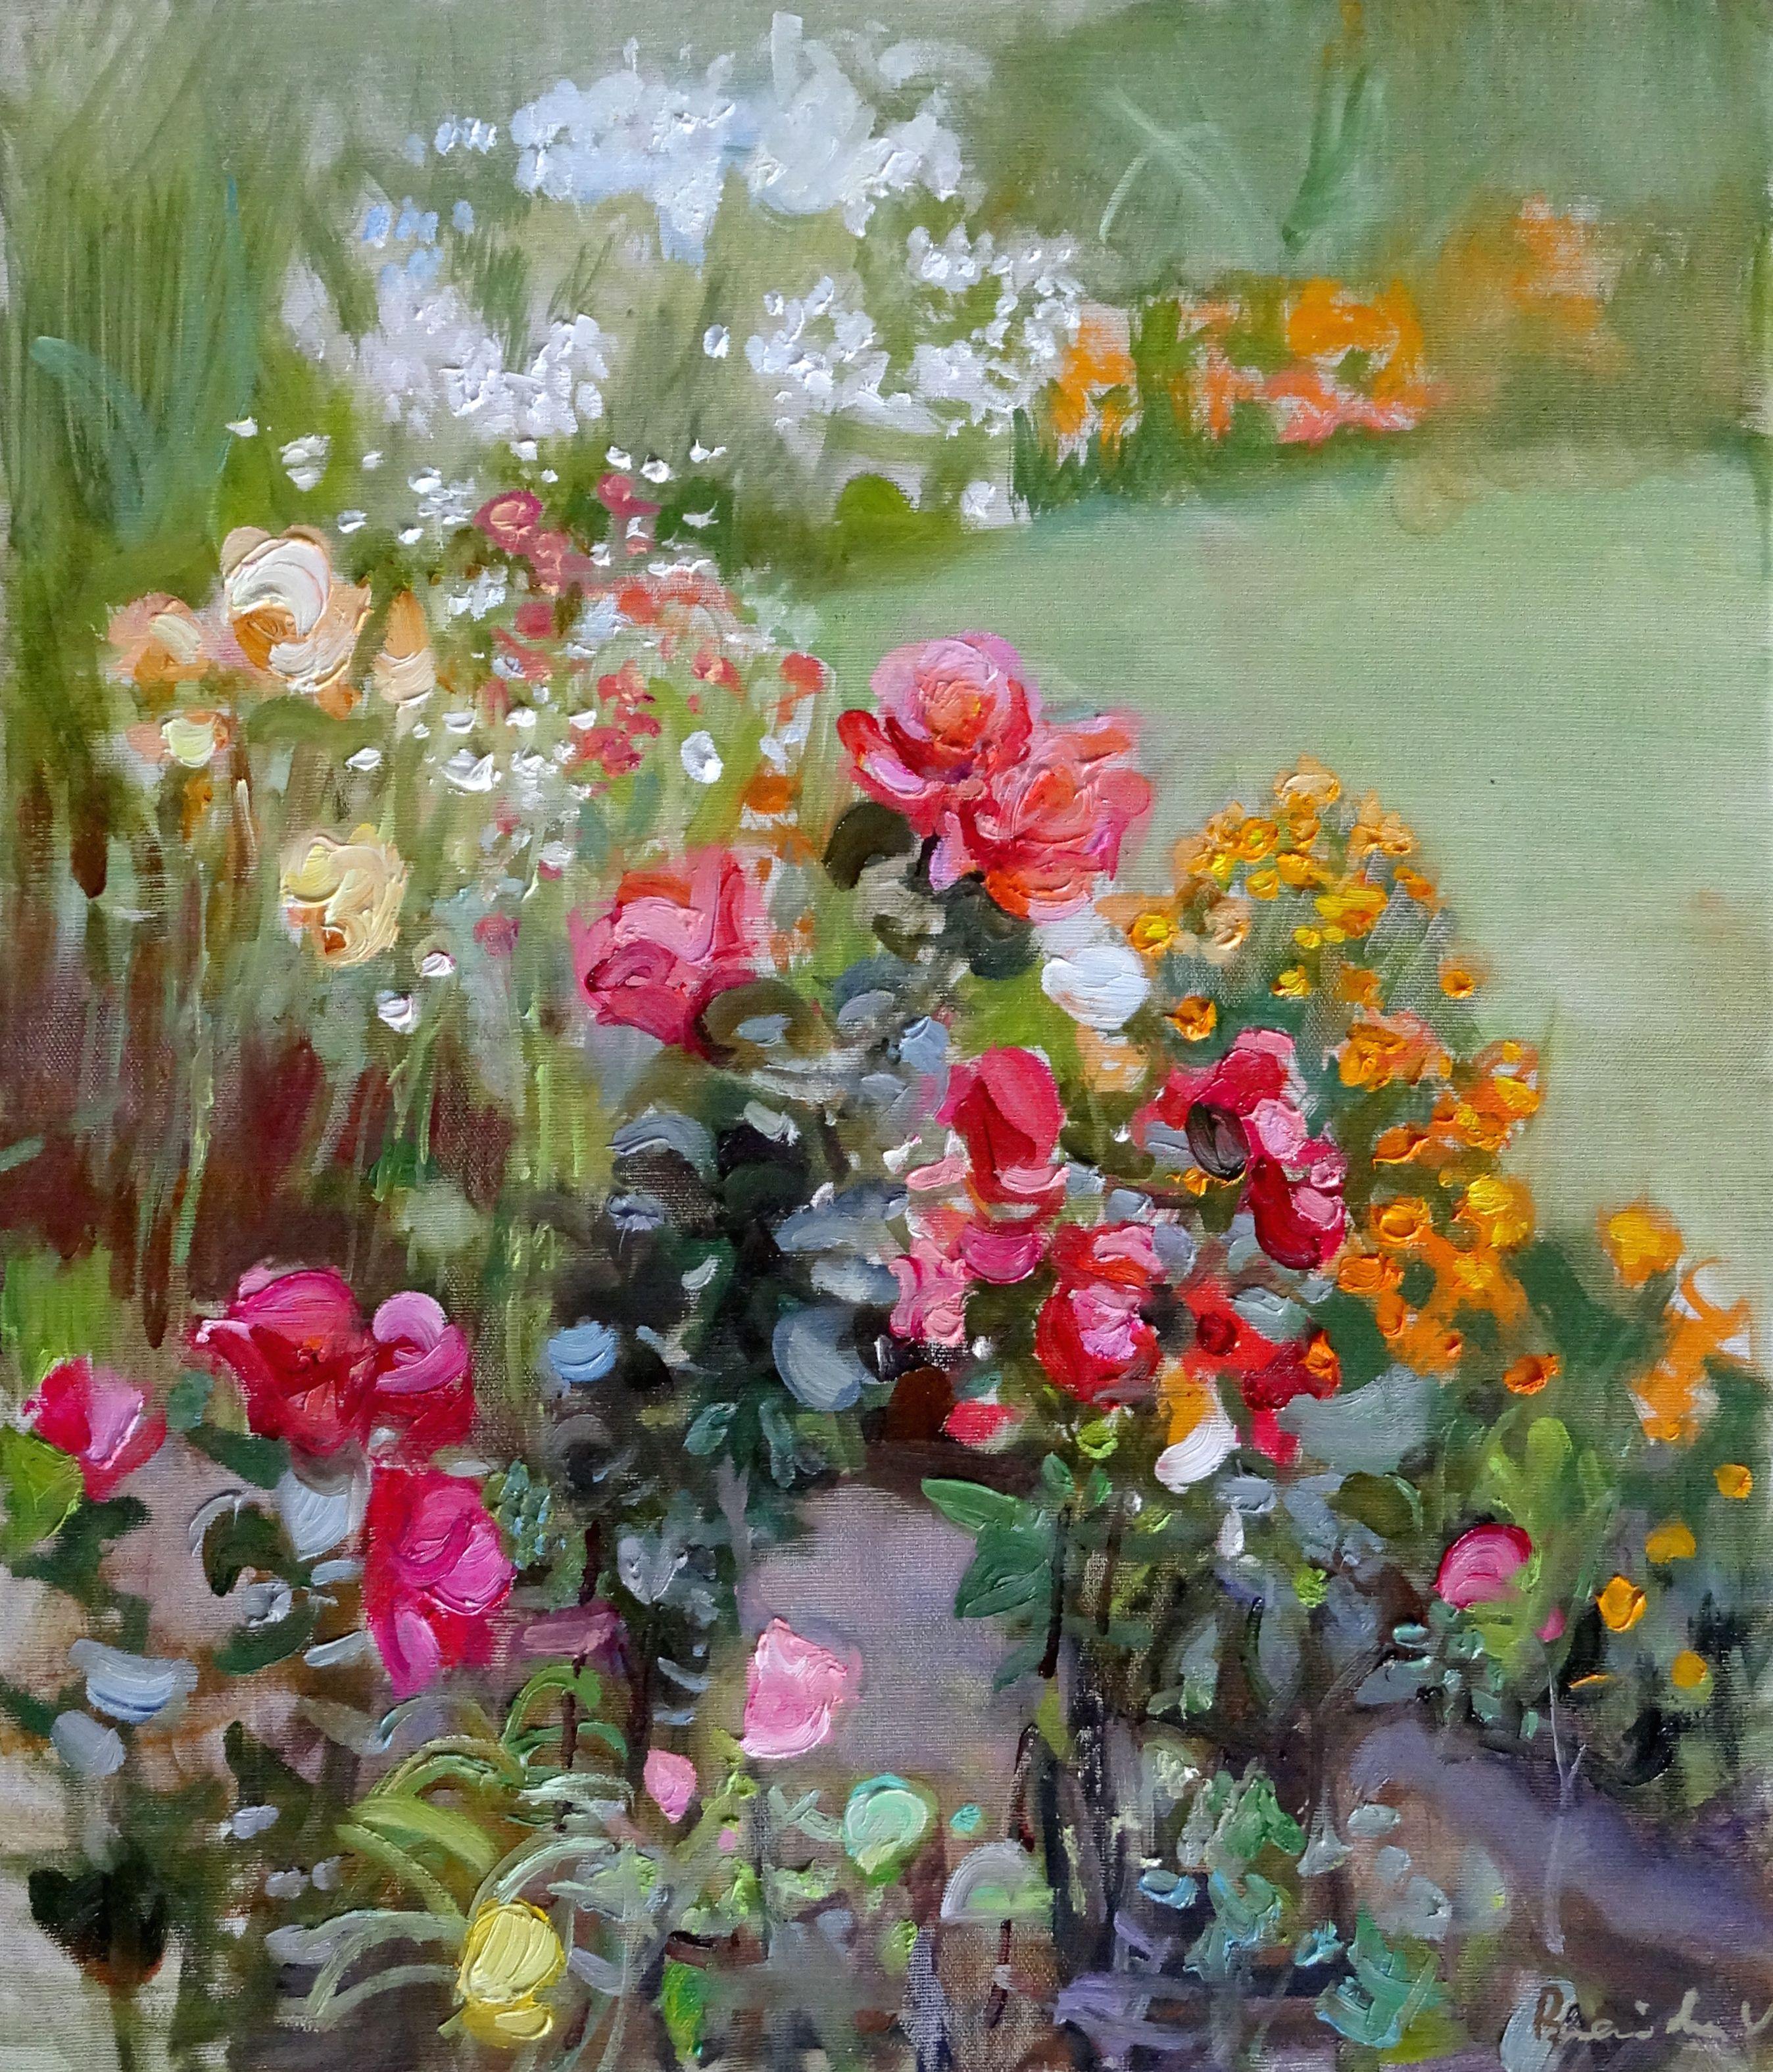 Valery Bayda  Landscape Painting - In the garden. 2018, oil on canvas, 53x45 cm